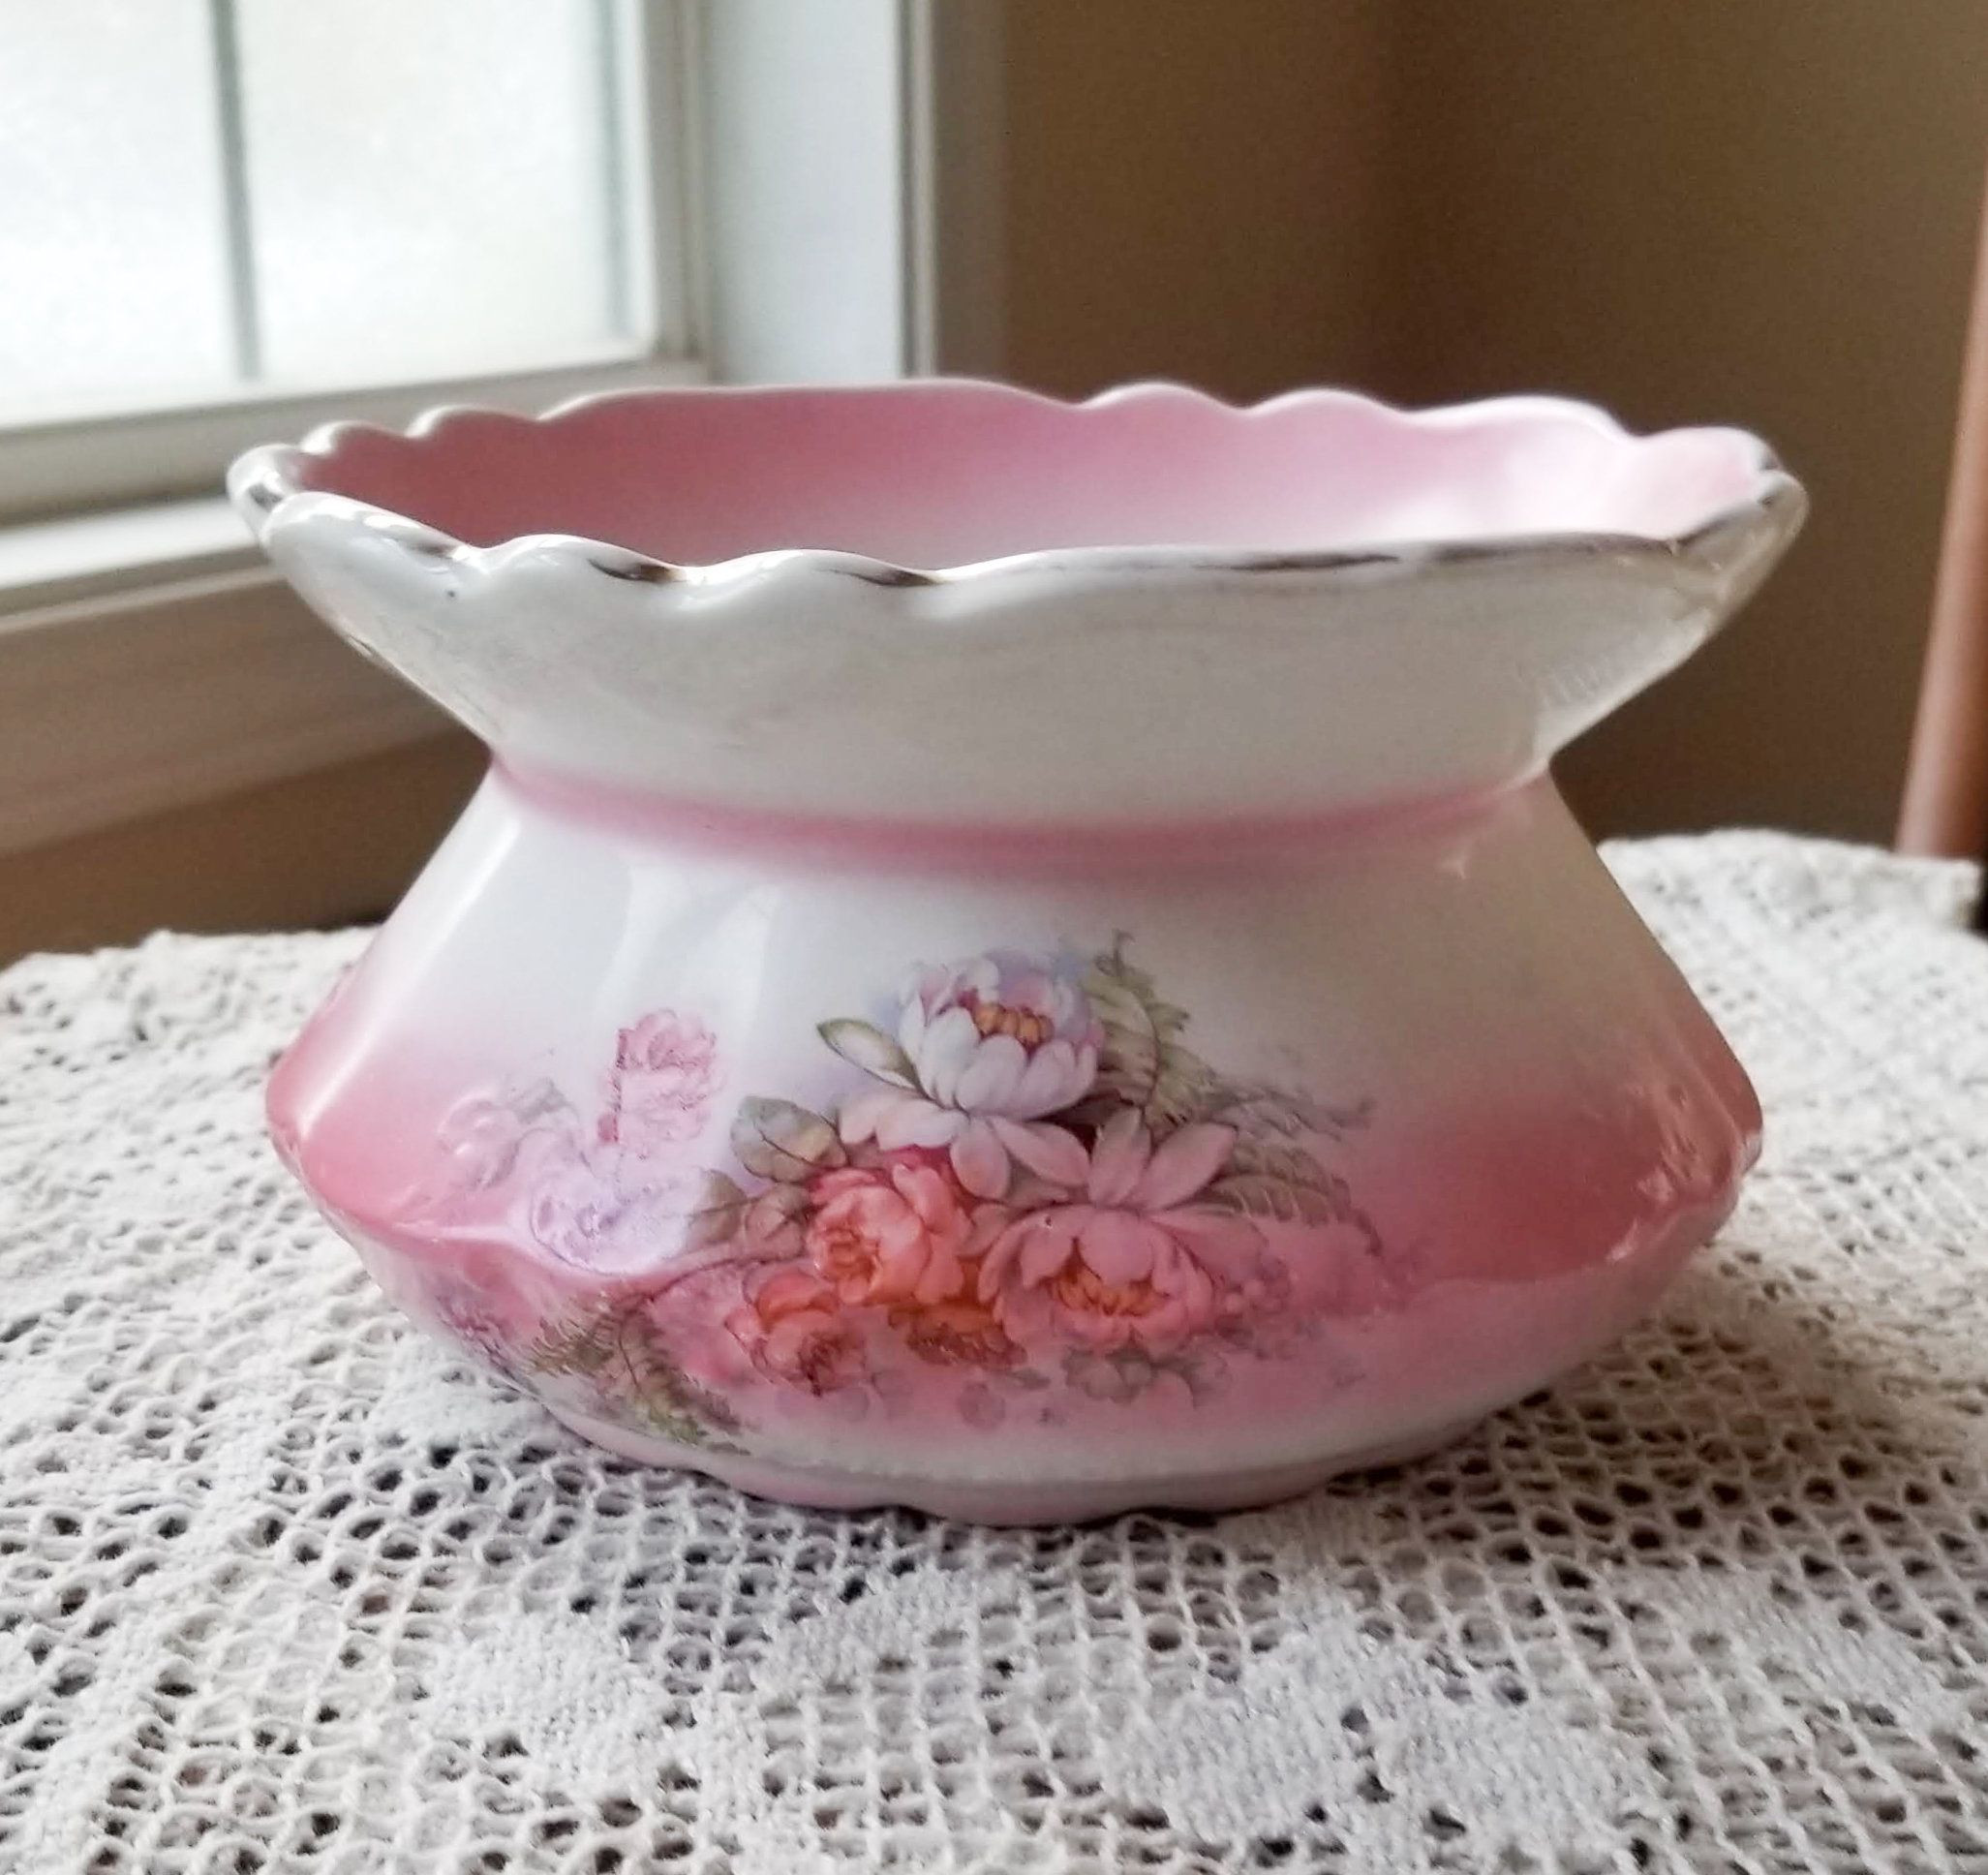 chinese flower vase porcelain of victorian ladies cuspidor spittoon sterling porcelain cache pot pertaining to victorian ladies cuspidor spittoon sterling porcelain cache pot planter vase by 2hippiesvintage on etsy